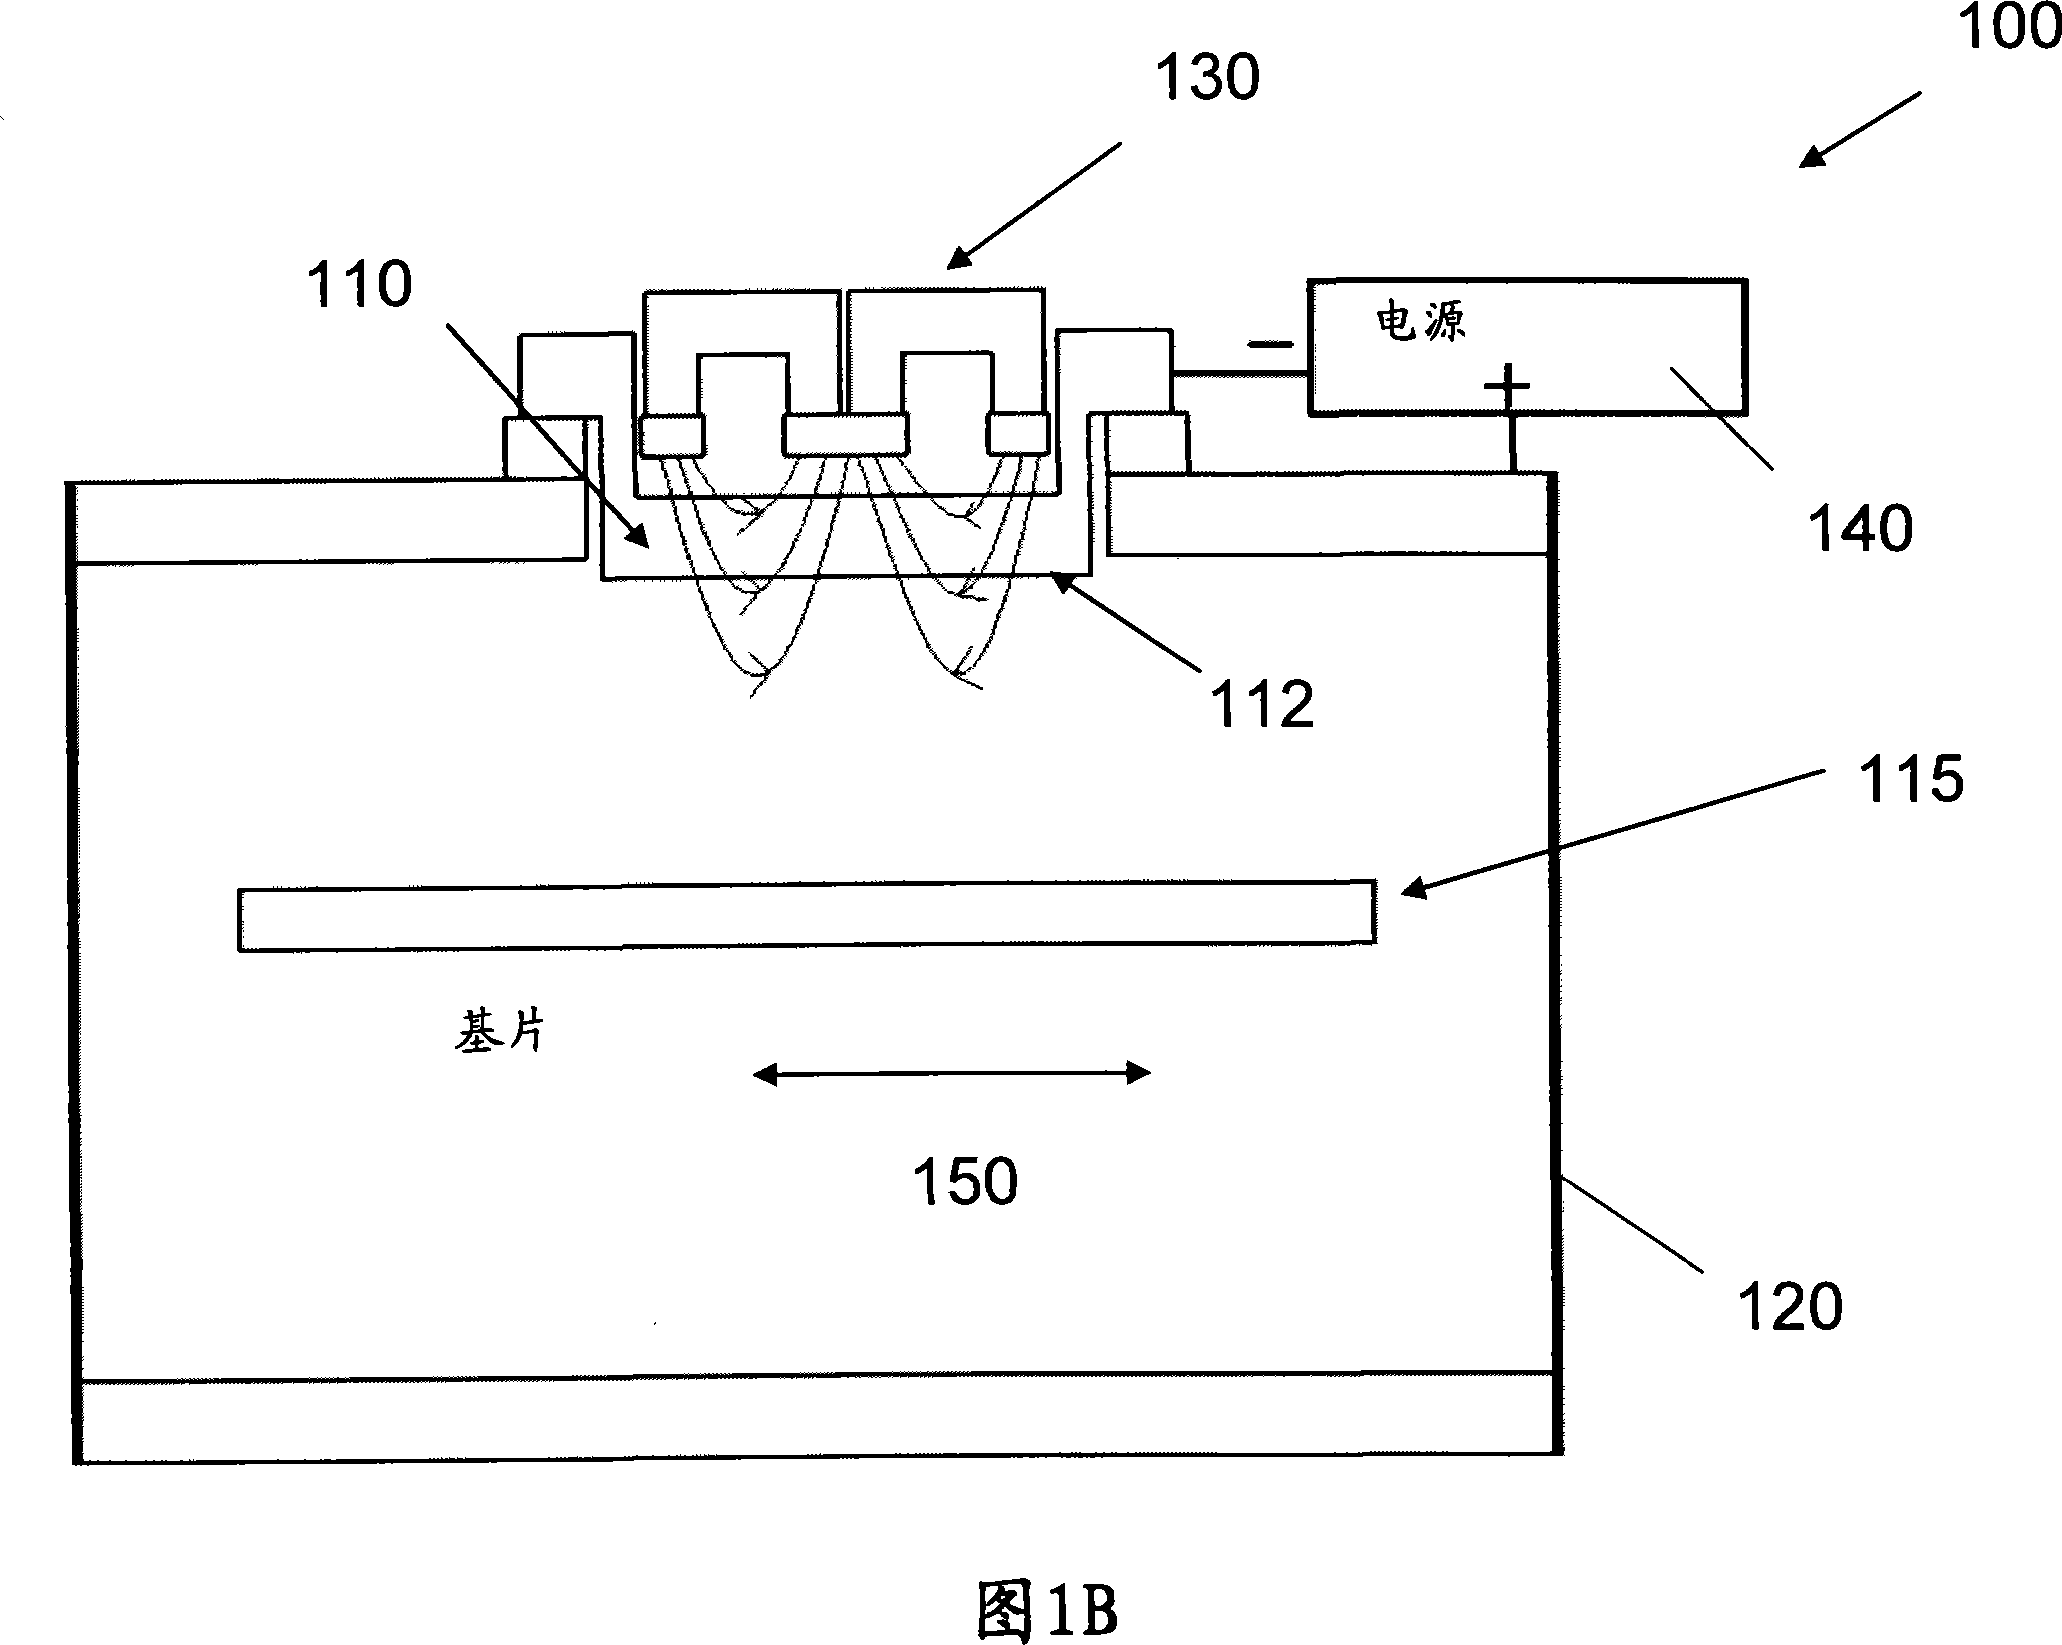 Deposition system and processing system